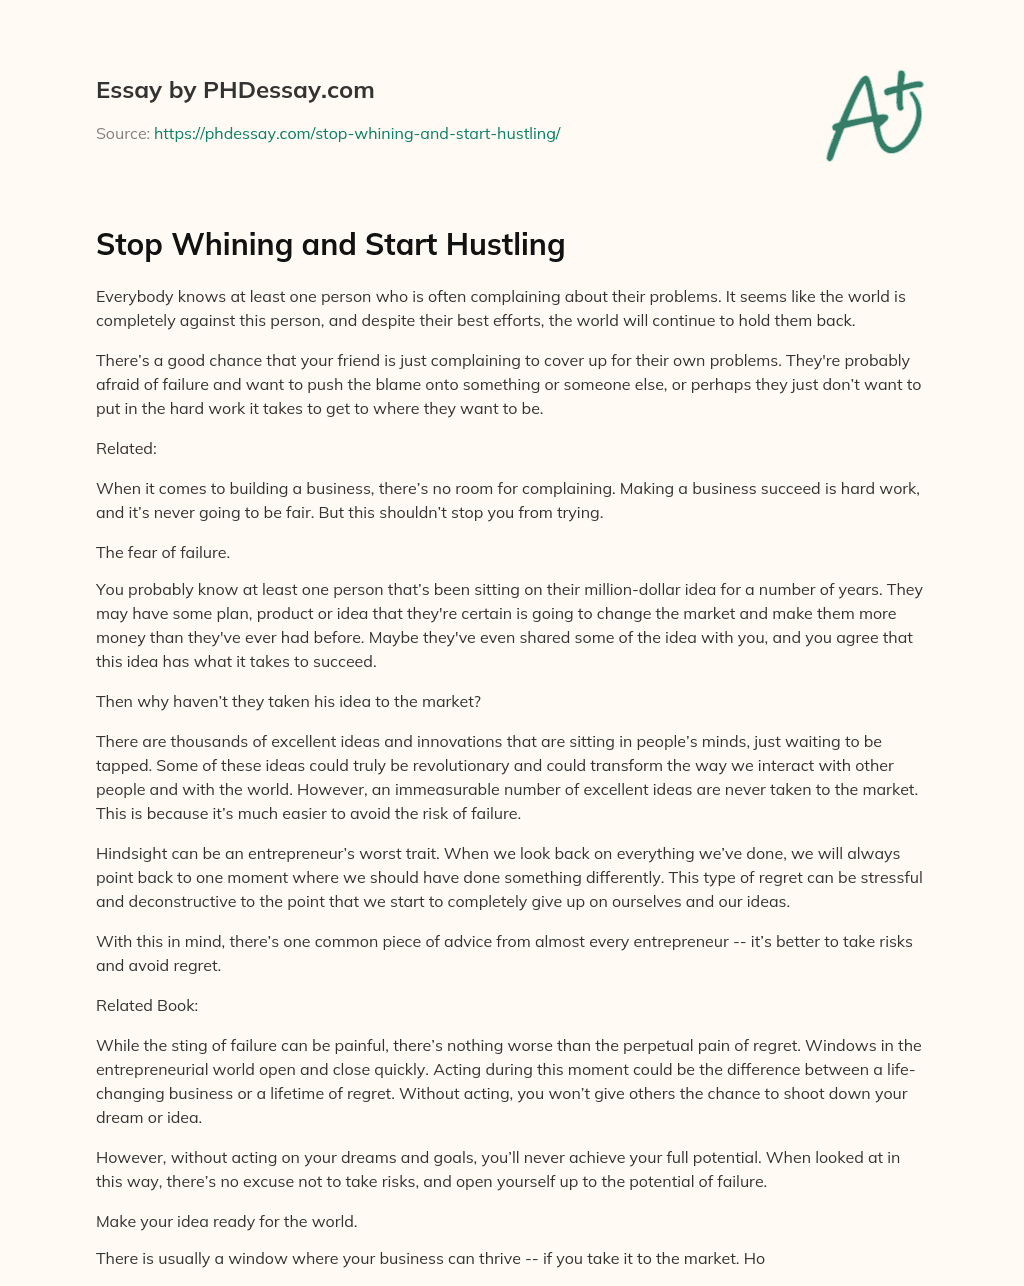 Stop Whining and Start Hustling essay